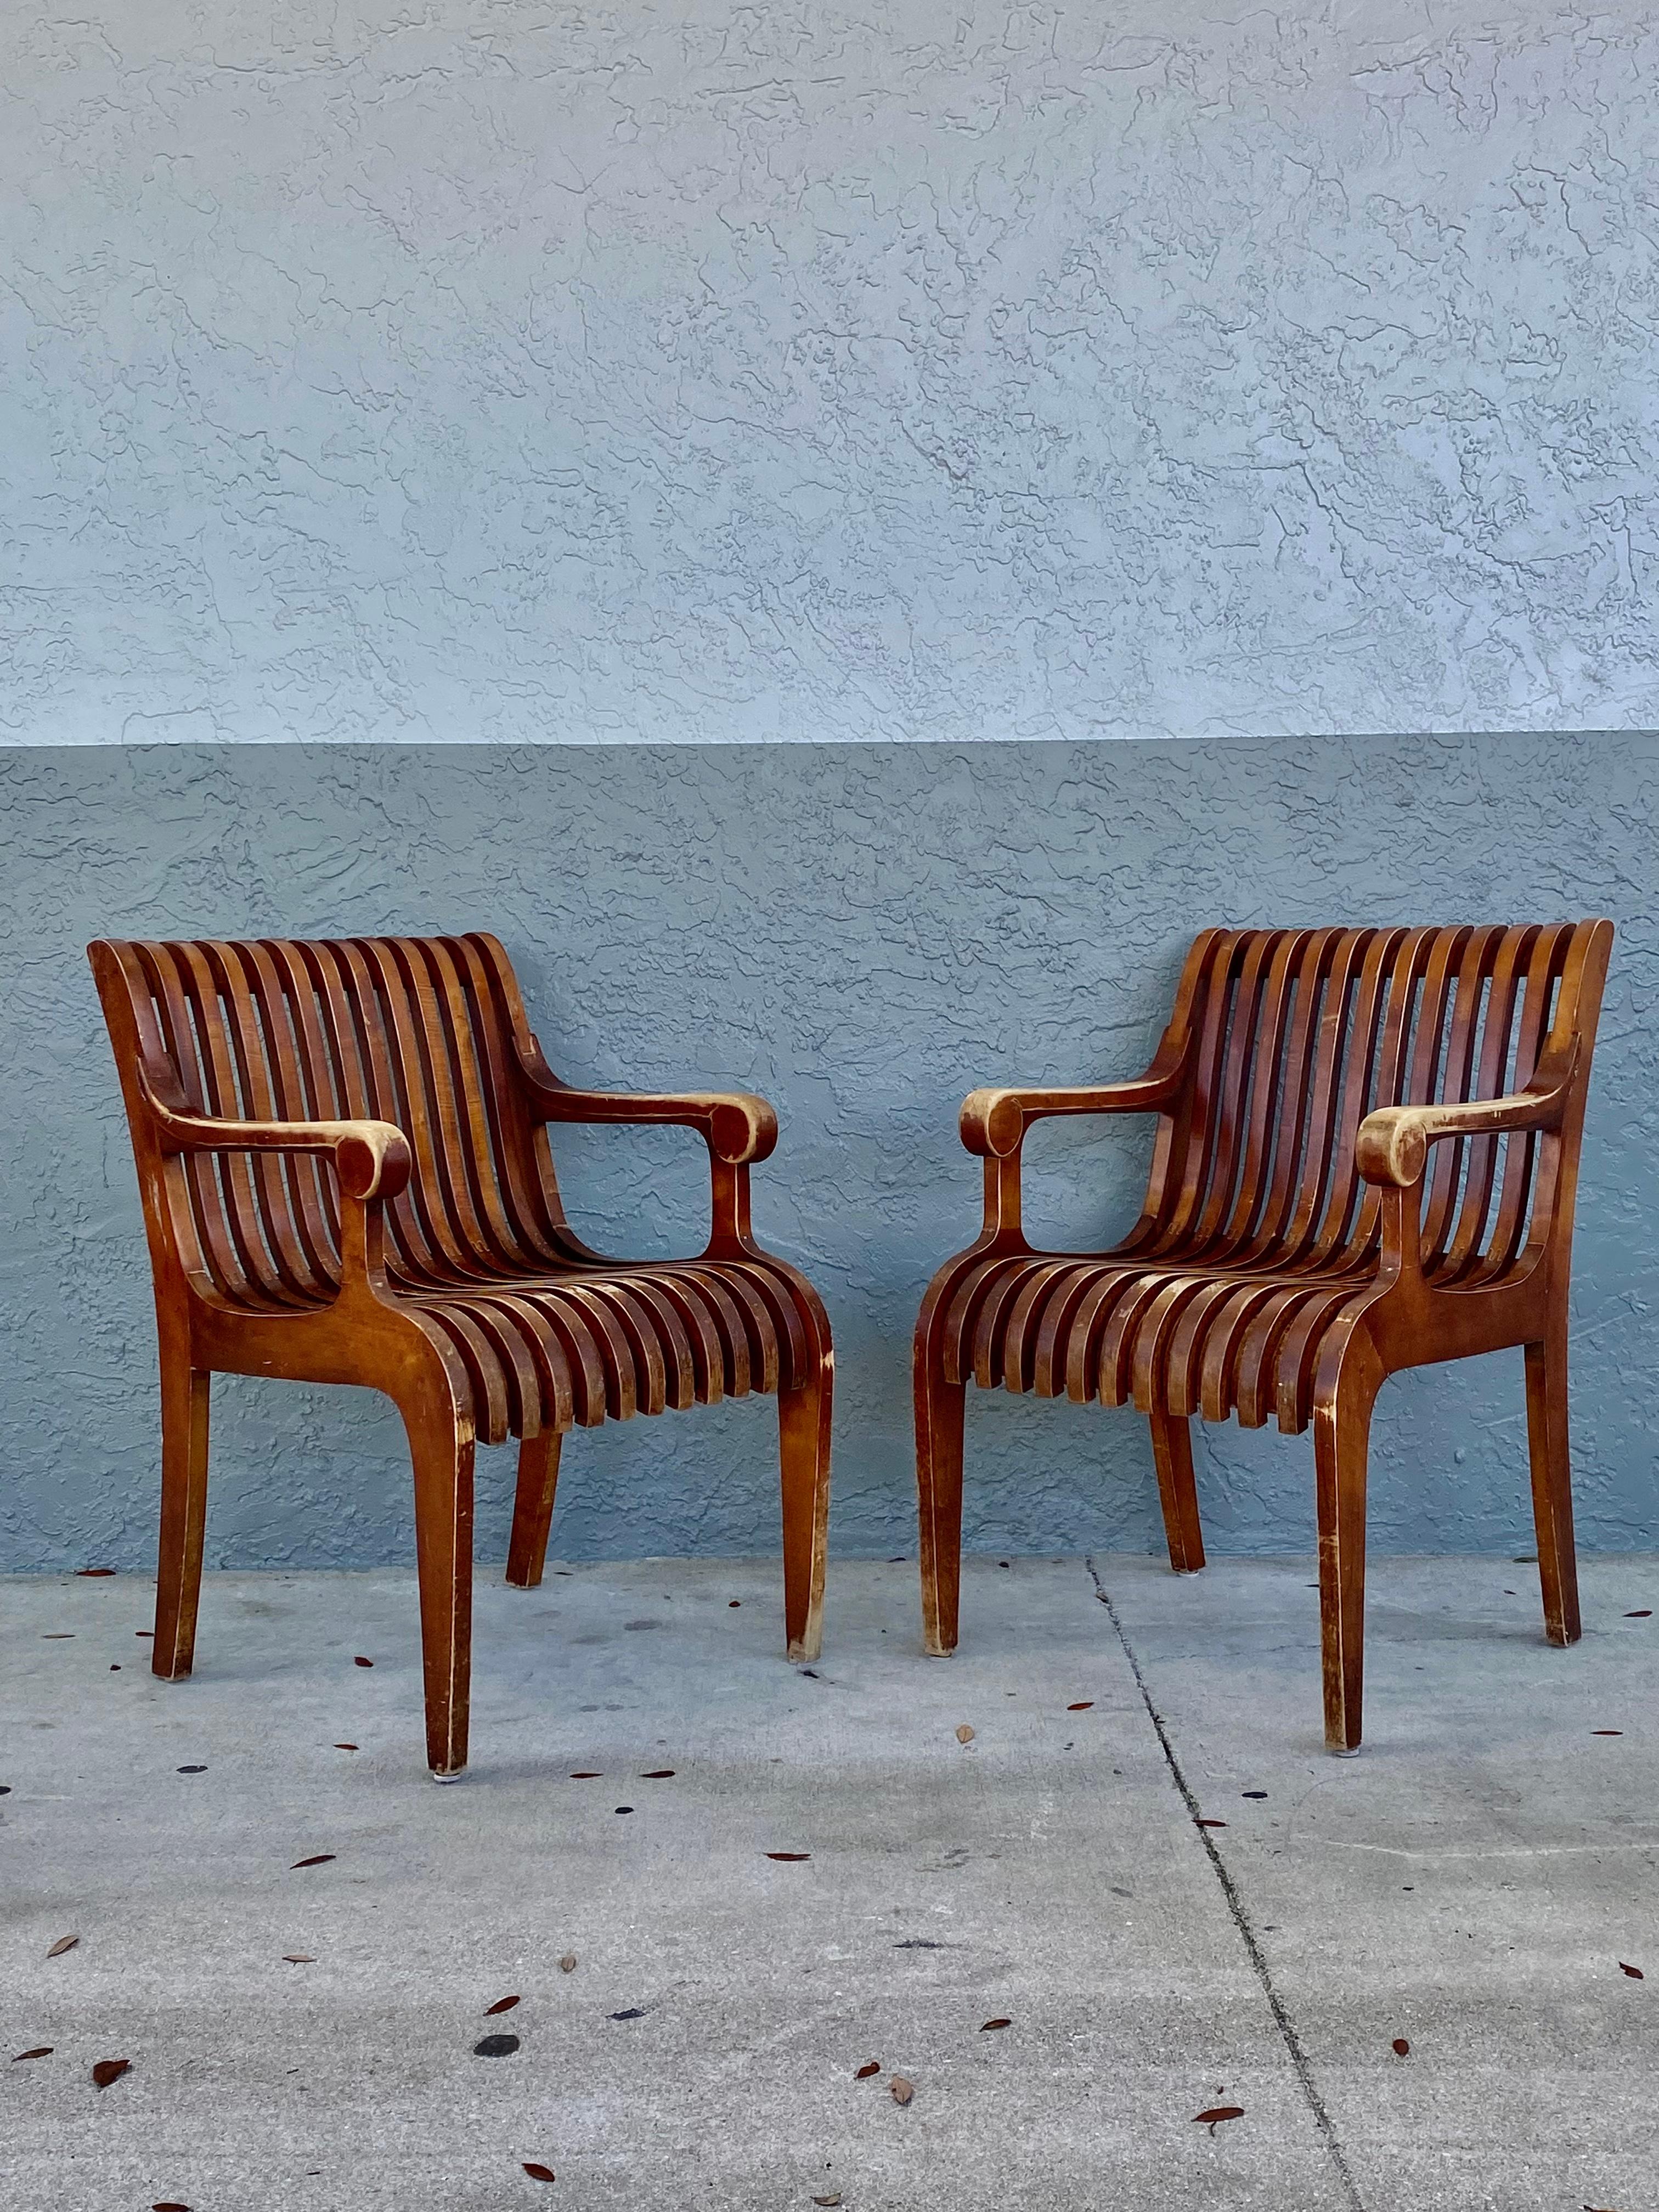 These extremely rare and stylish original bentwood chairs are packed with personality! Outstanding design is exhibited throughout. Just look at the curves and details on this beauty! Sculptural slatted bentwood slats are molded to follow the curves